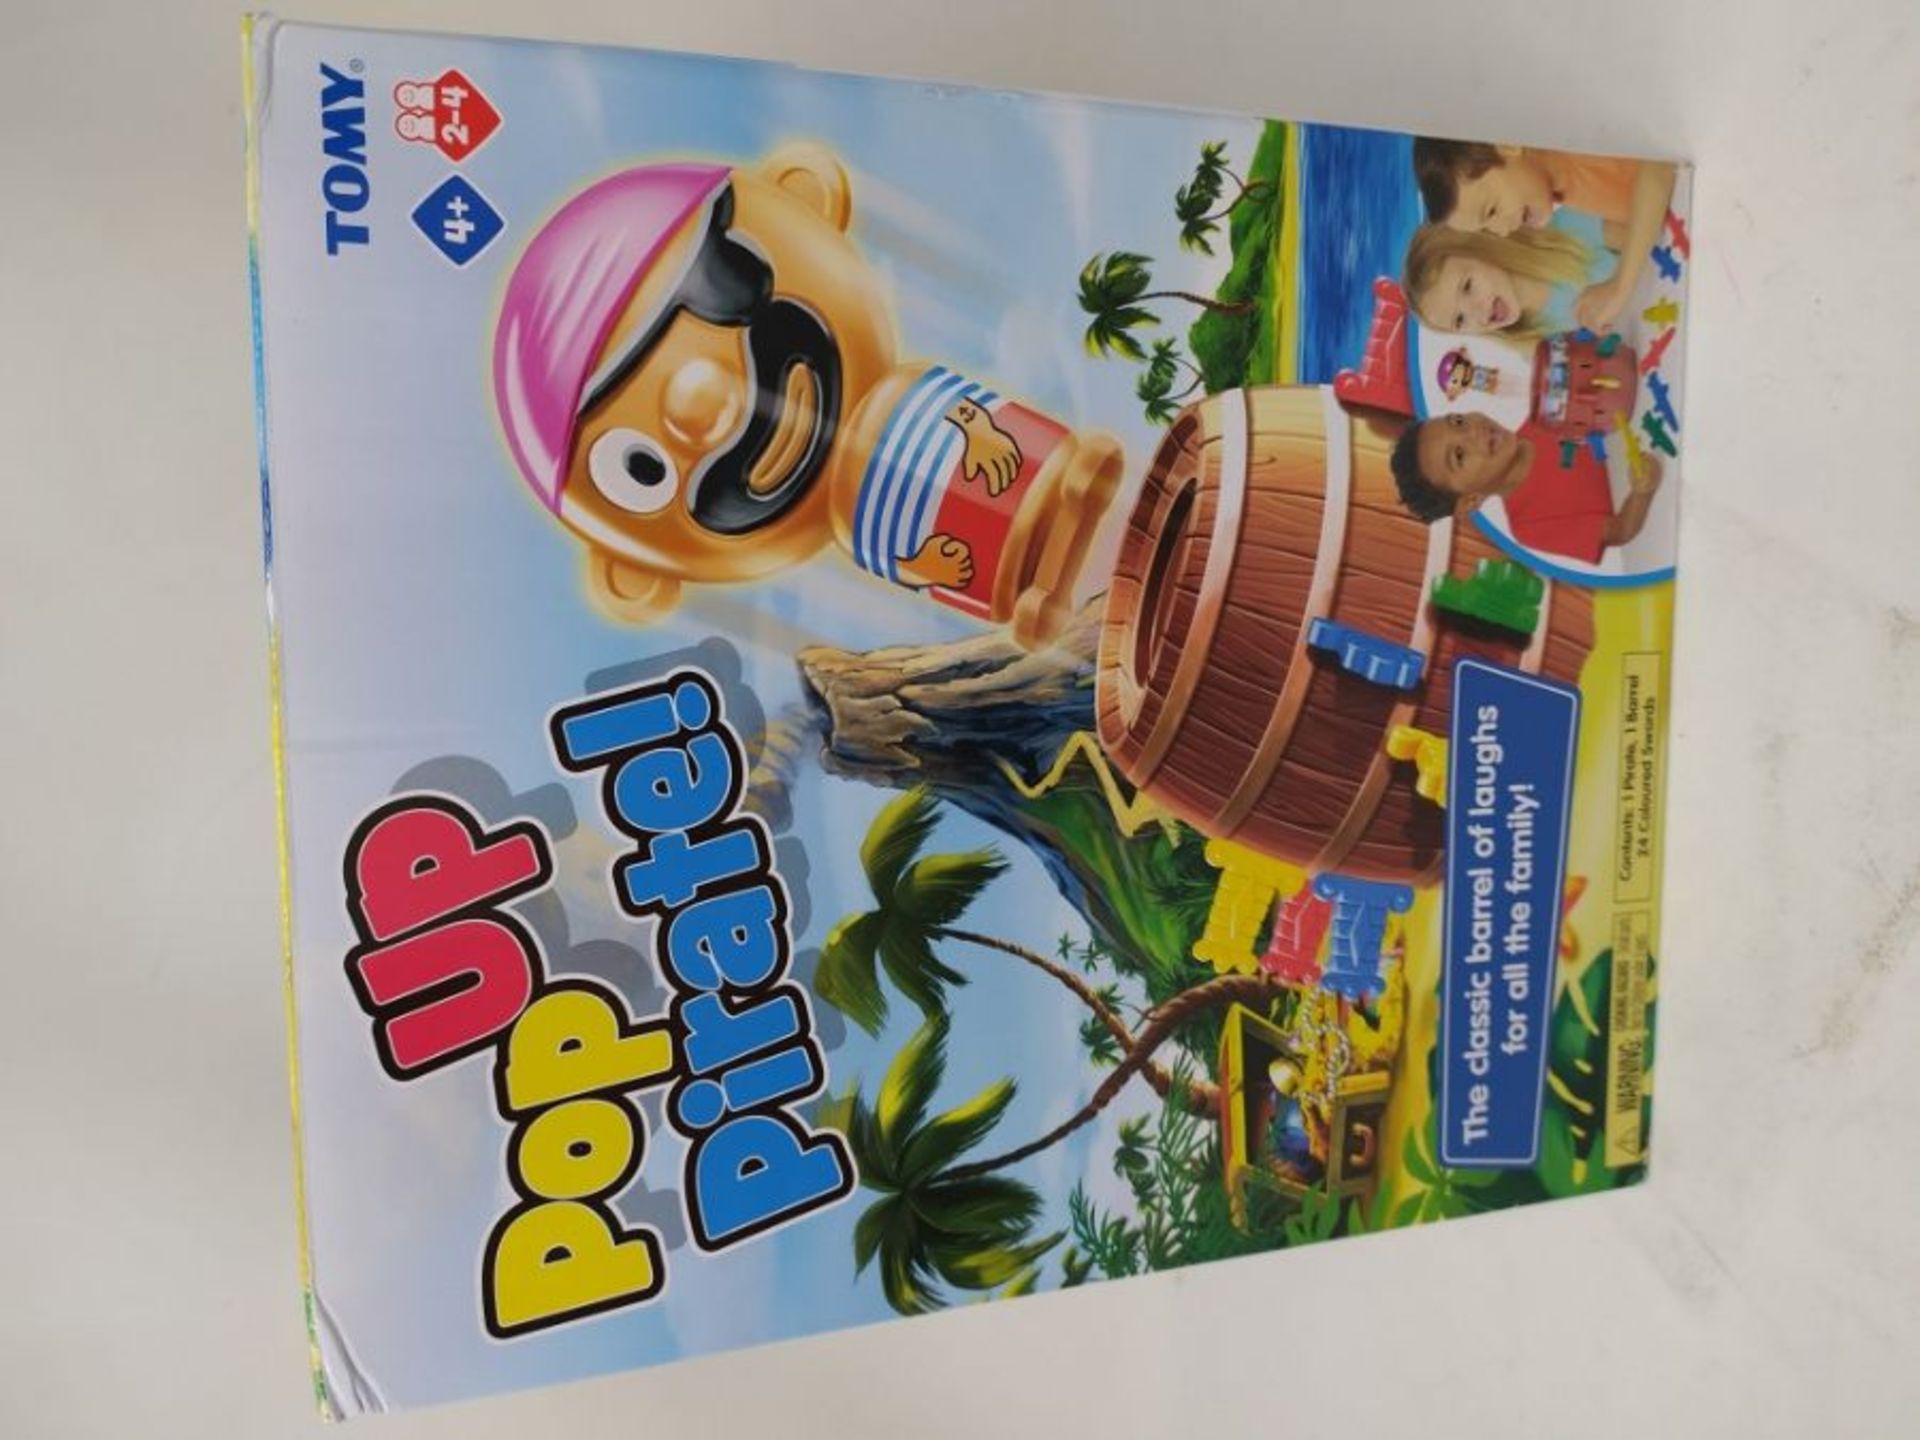 TOMY Games T7028 TOMY Pop Up Pirate Classic Children's Action Board Game Toy, Wood-Cho - Image 2 of 3